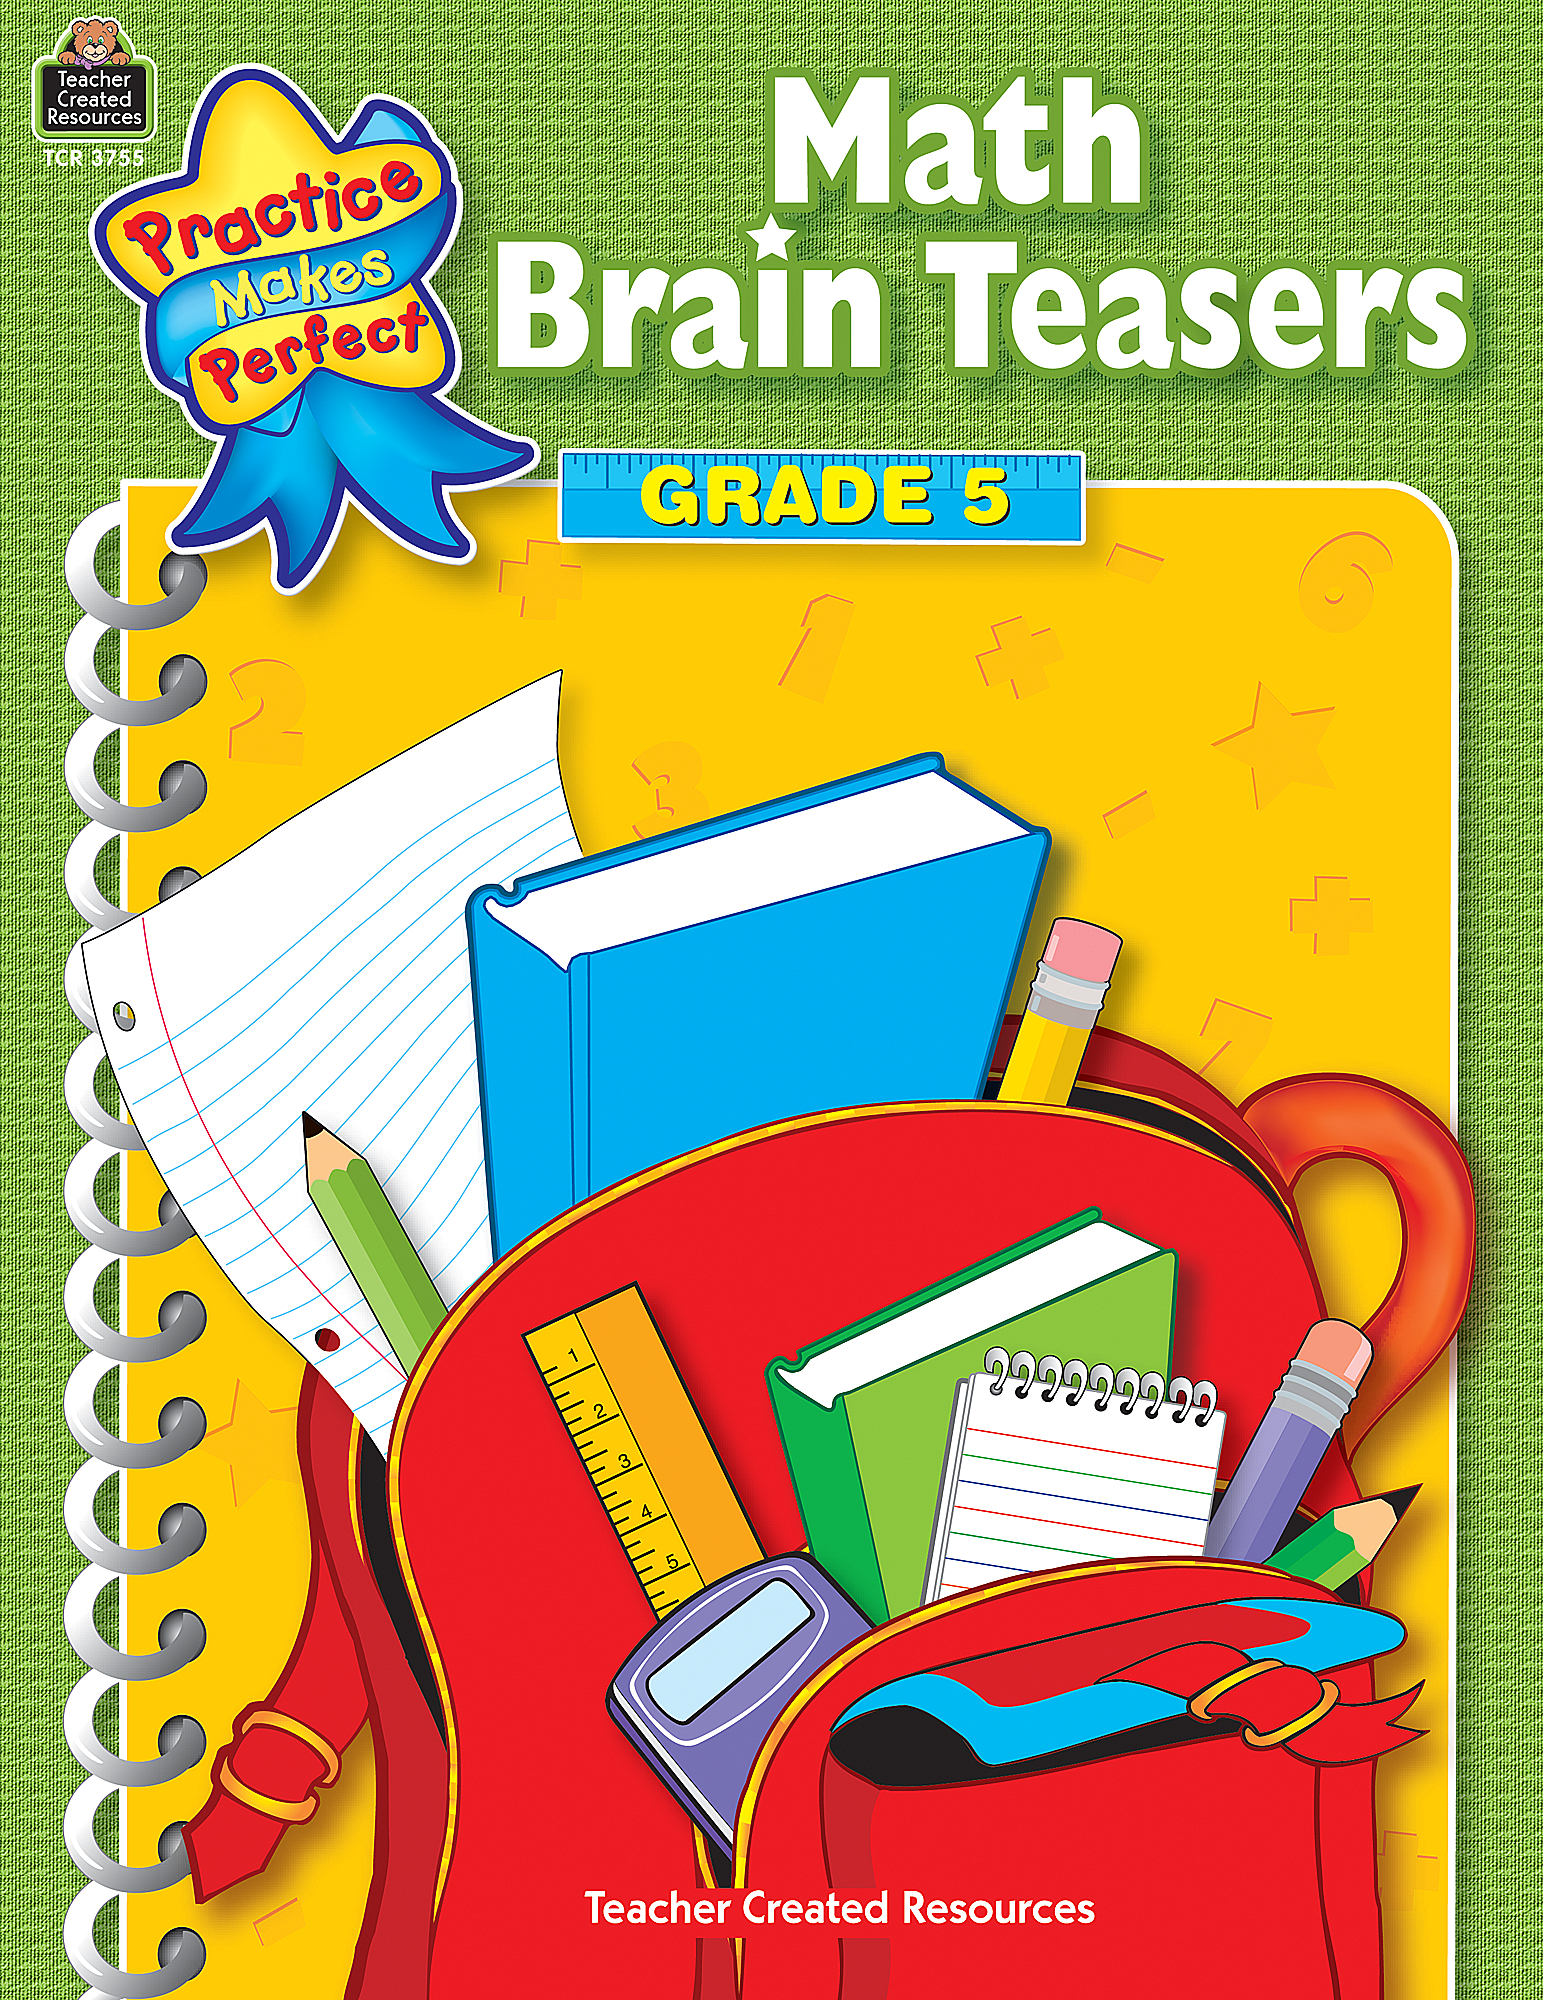 5th-grade-math-brain-teasers-worksheets-db-excel